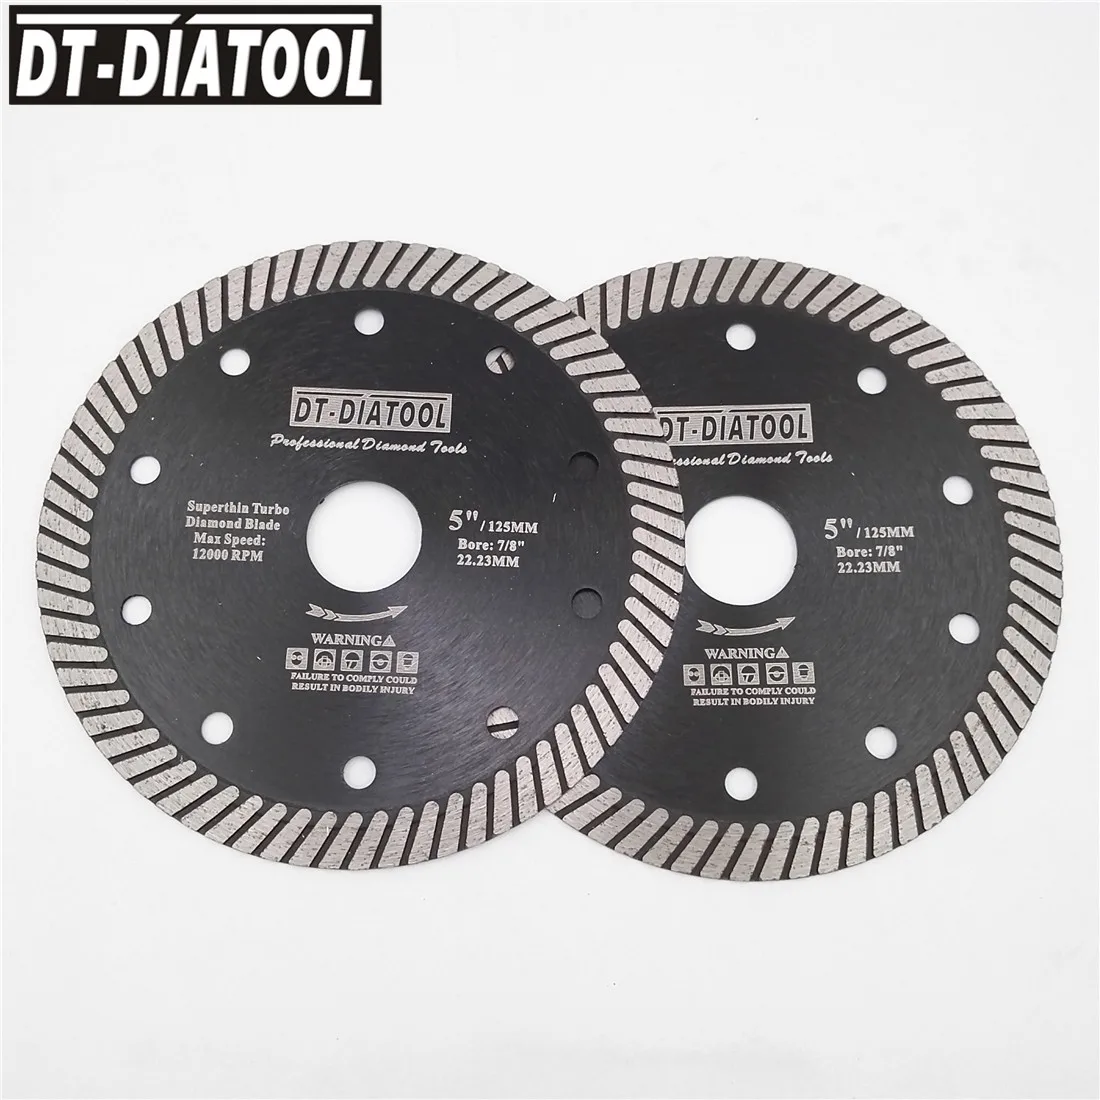 

DT-DIATOOL 2pcs 5 Inches Diamond Hot Pressed Super Thin Turbo Saw Blades Bore 22.23mm Cutting Disc for Tile Marble Granite